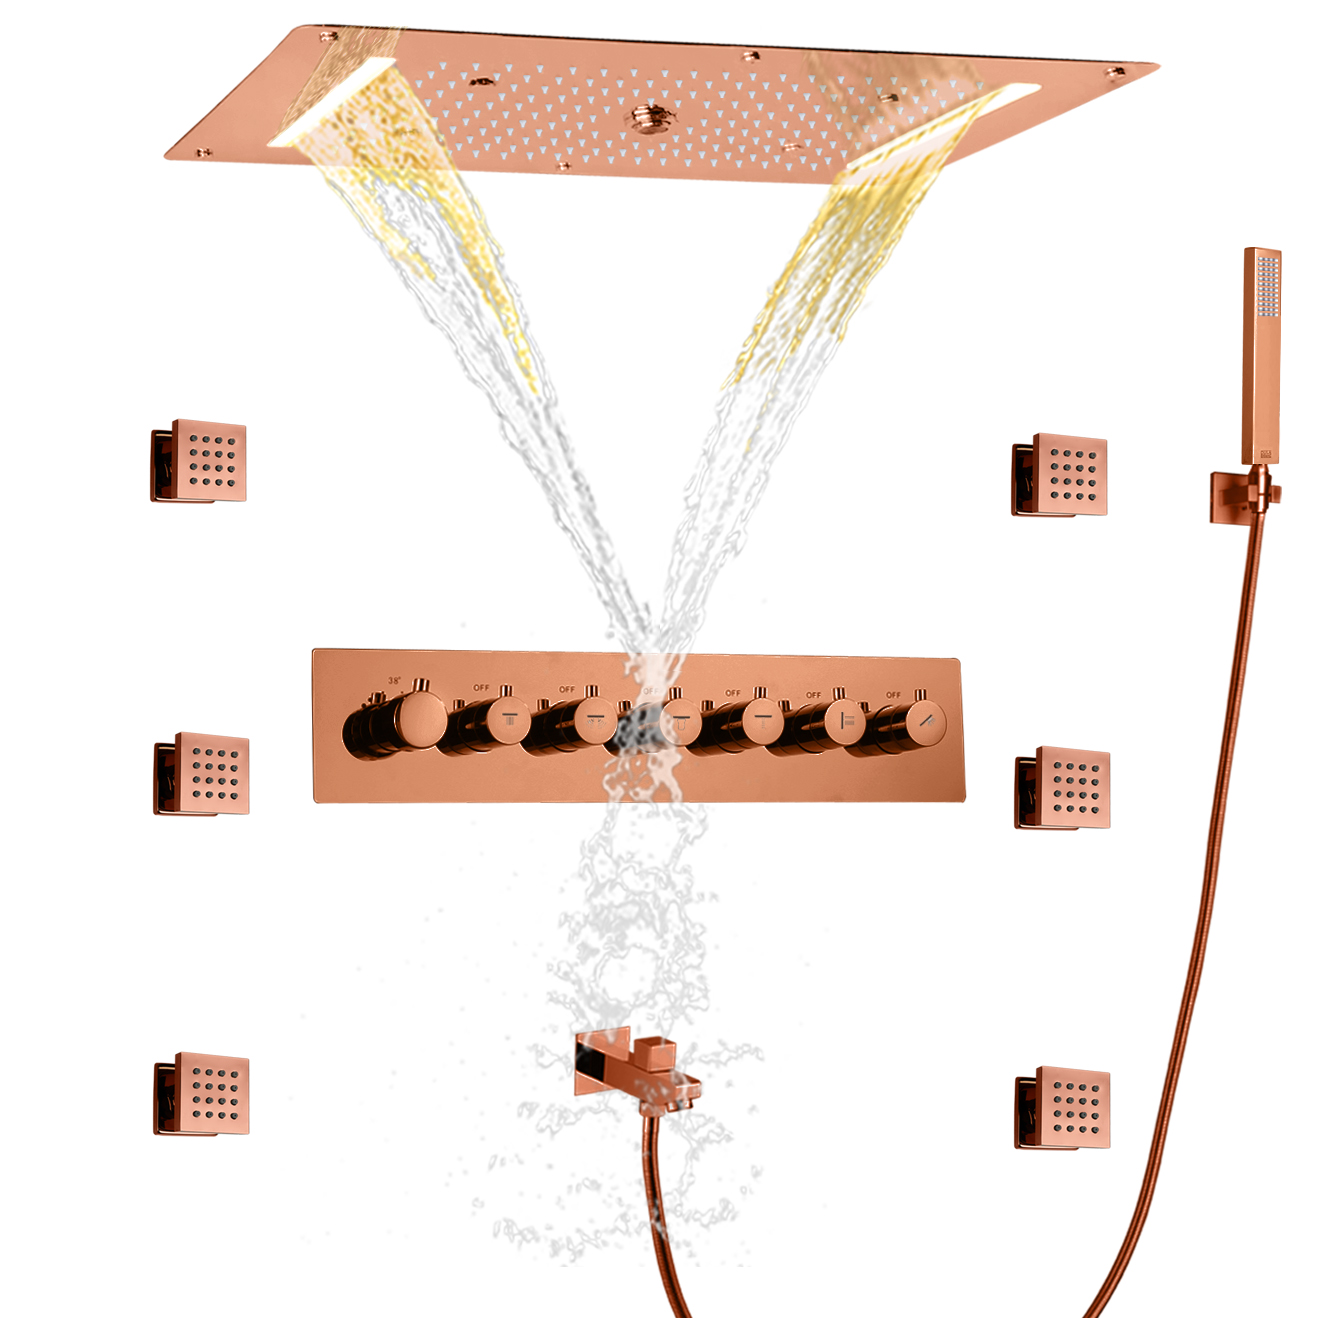 Rose Gold Embedded Bath Ceiling Shower Mixer Rainfall Waterfall Shower Tub Spout Combo Set